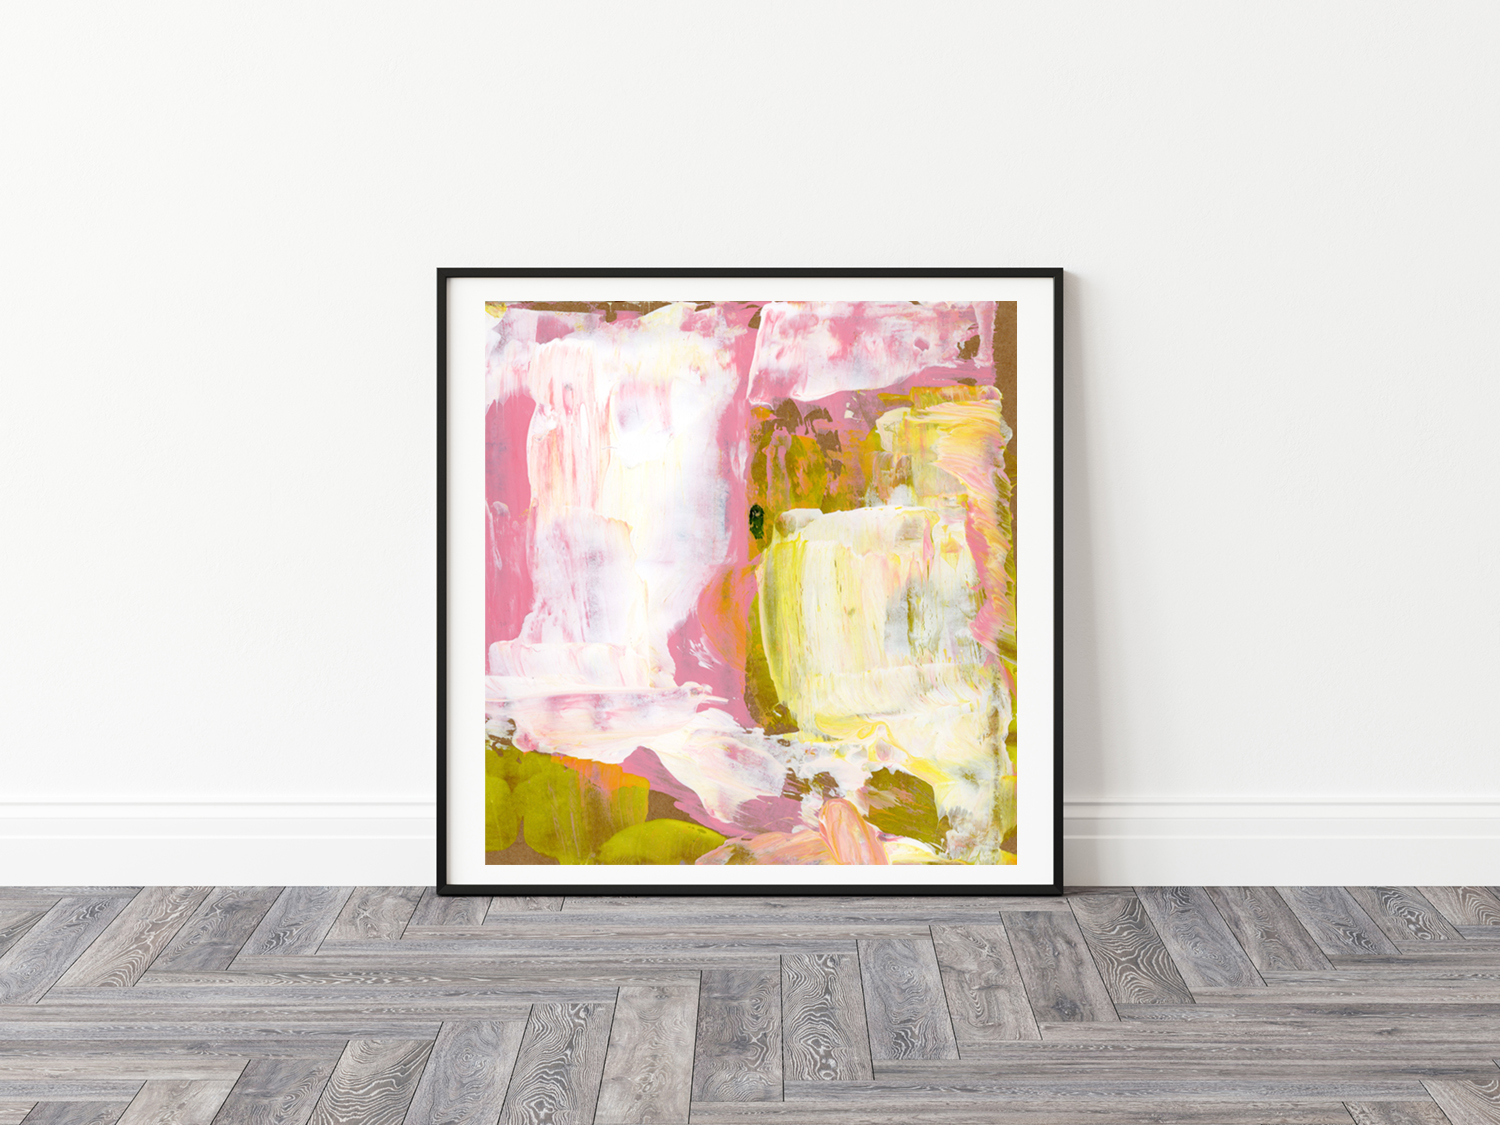 Katie Jeanne Wood - Maybe If We Walk abstract painting print